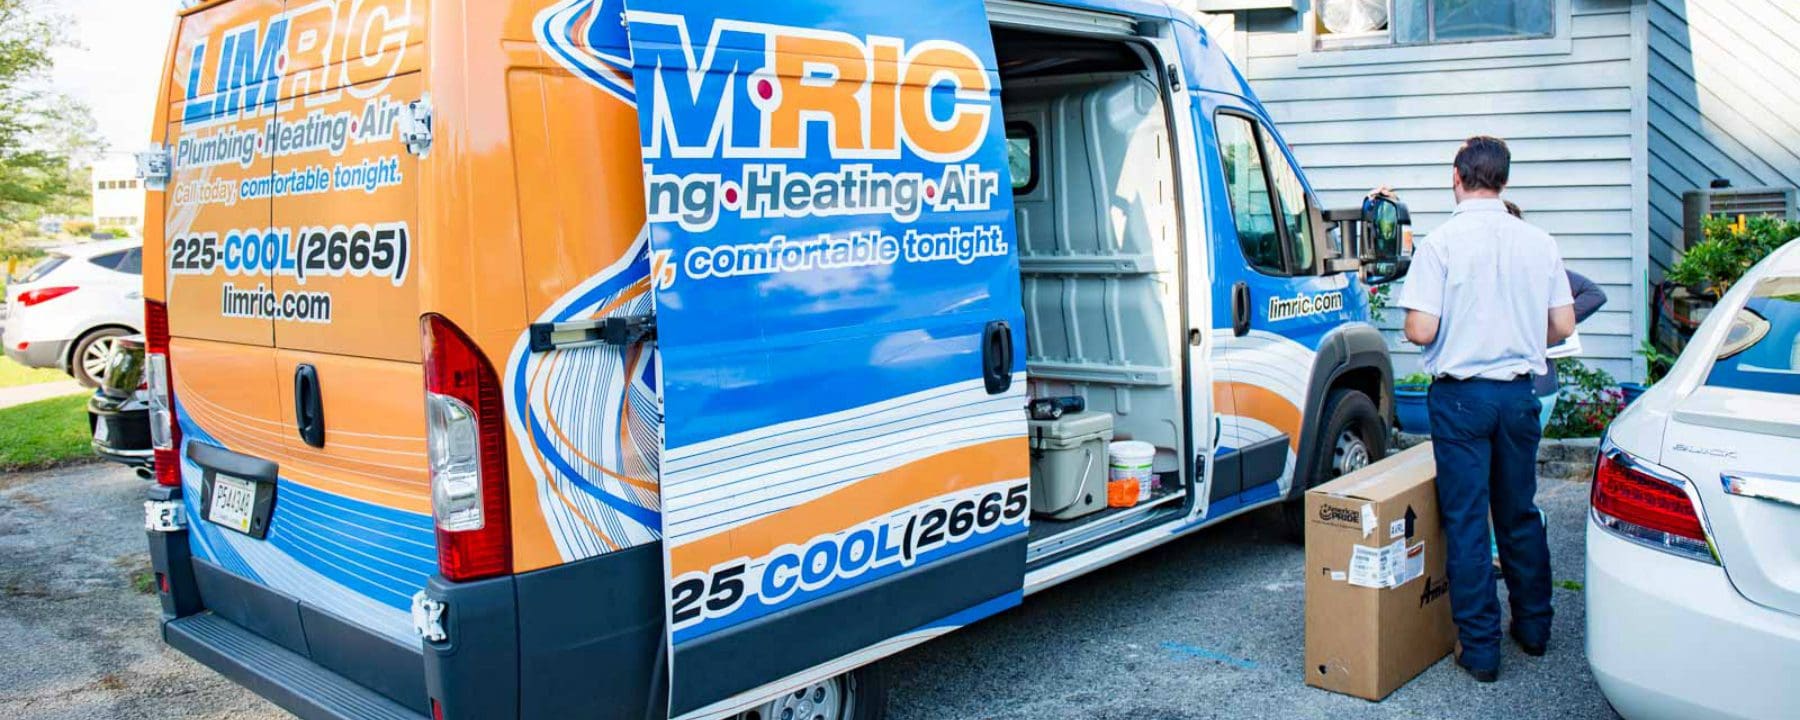 Featured image for “Expert HVAC Repair from LimRic Plumbing, Heating & Air”